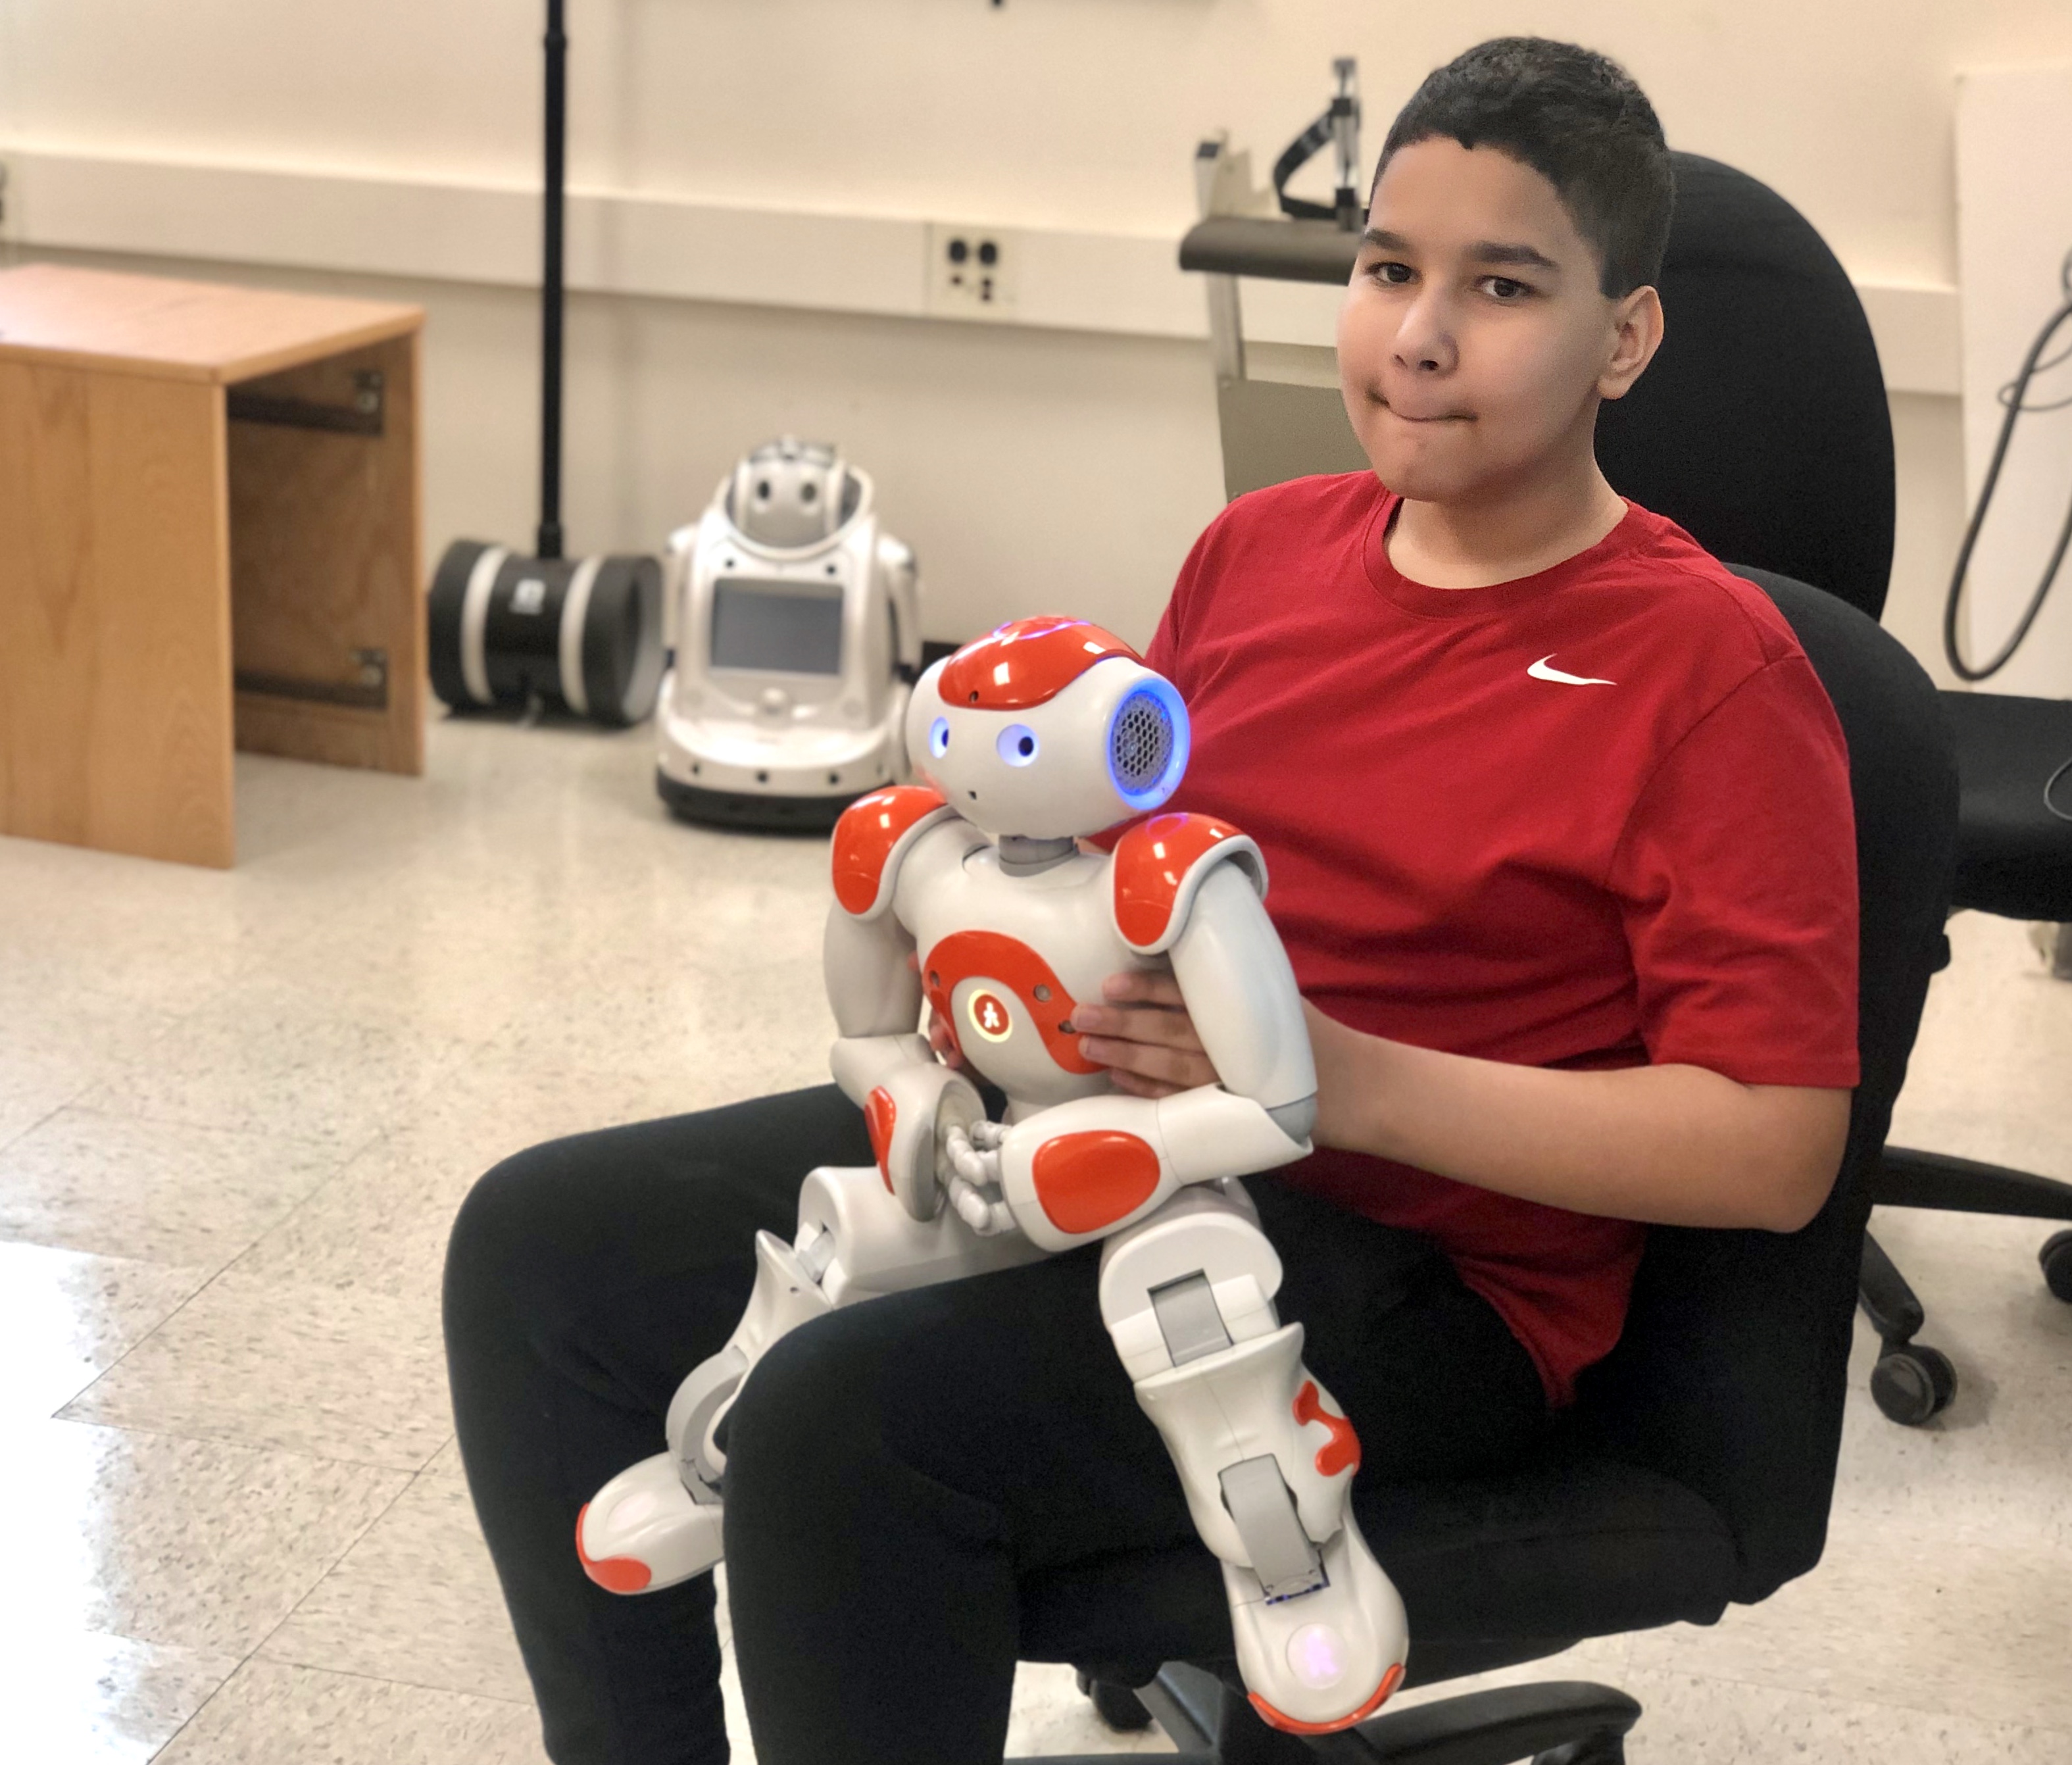 Seventh grader Jaryn Bibb participated in a study at UofL that helps students with autism prepare for real classrooms by working with robots.